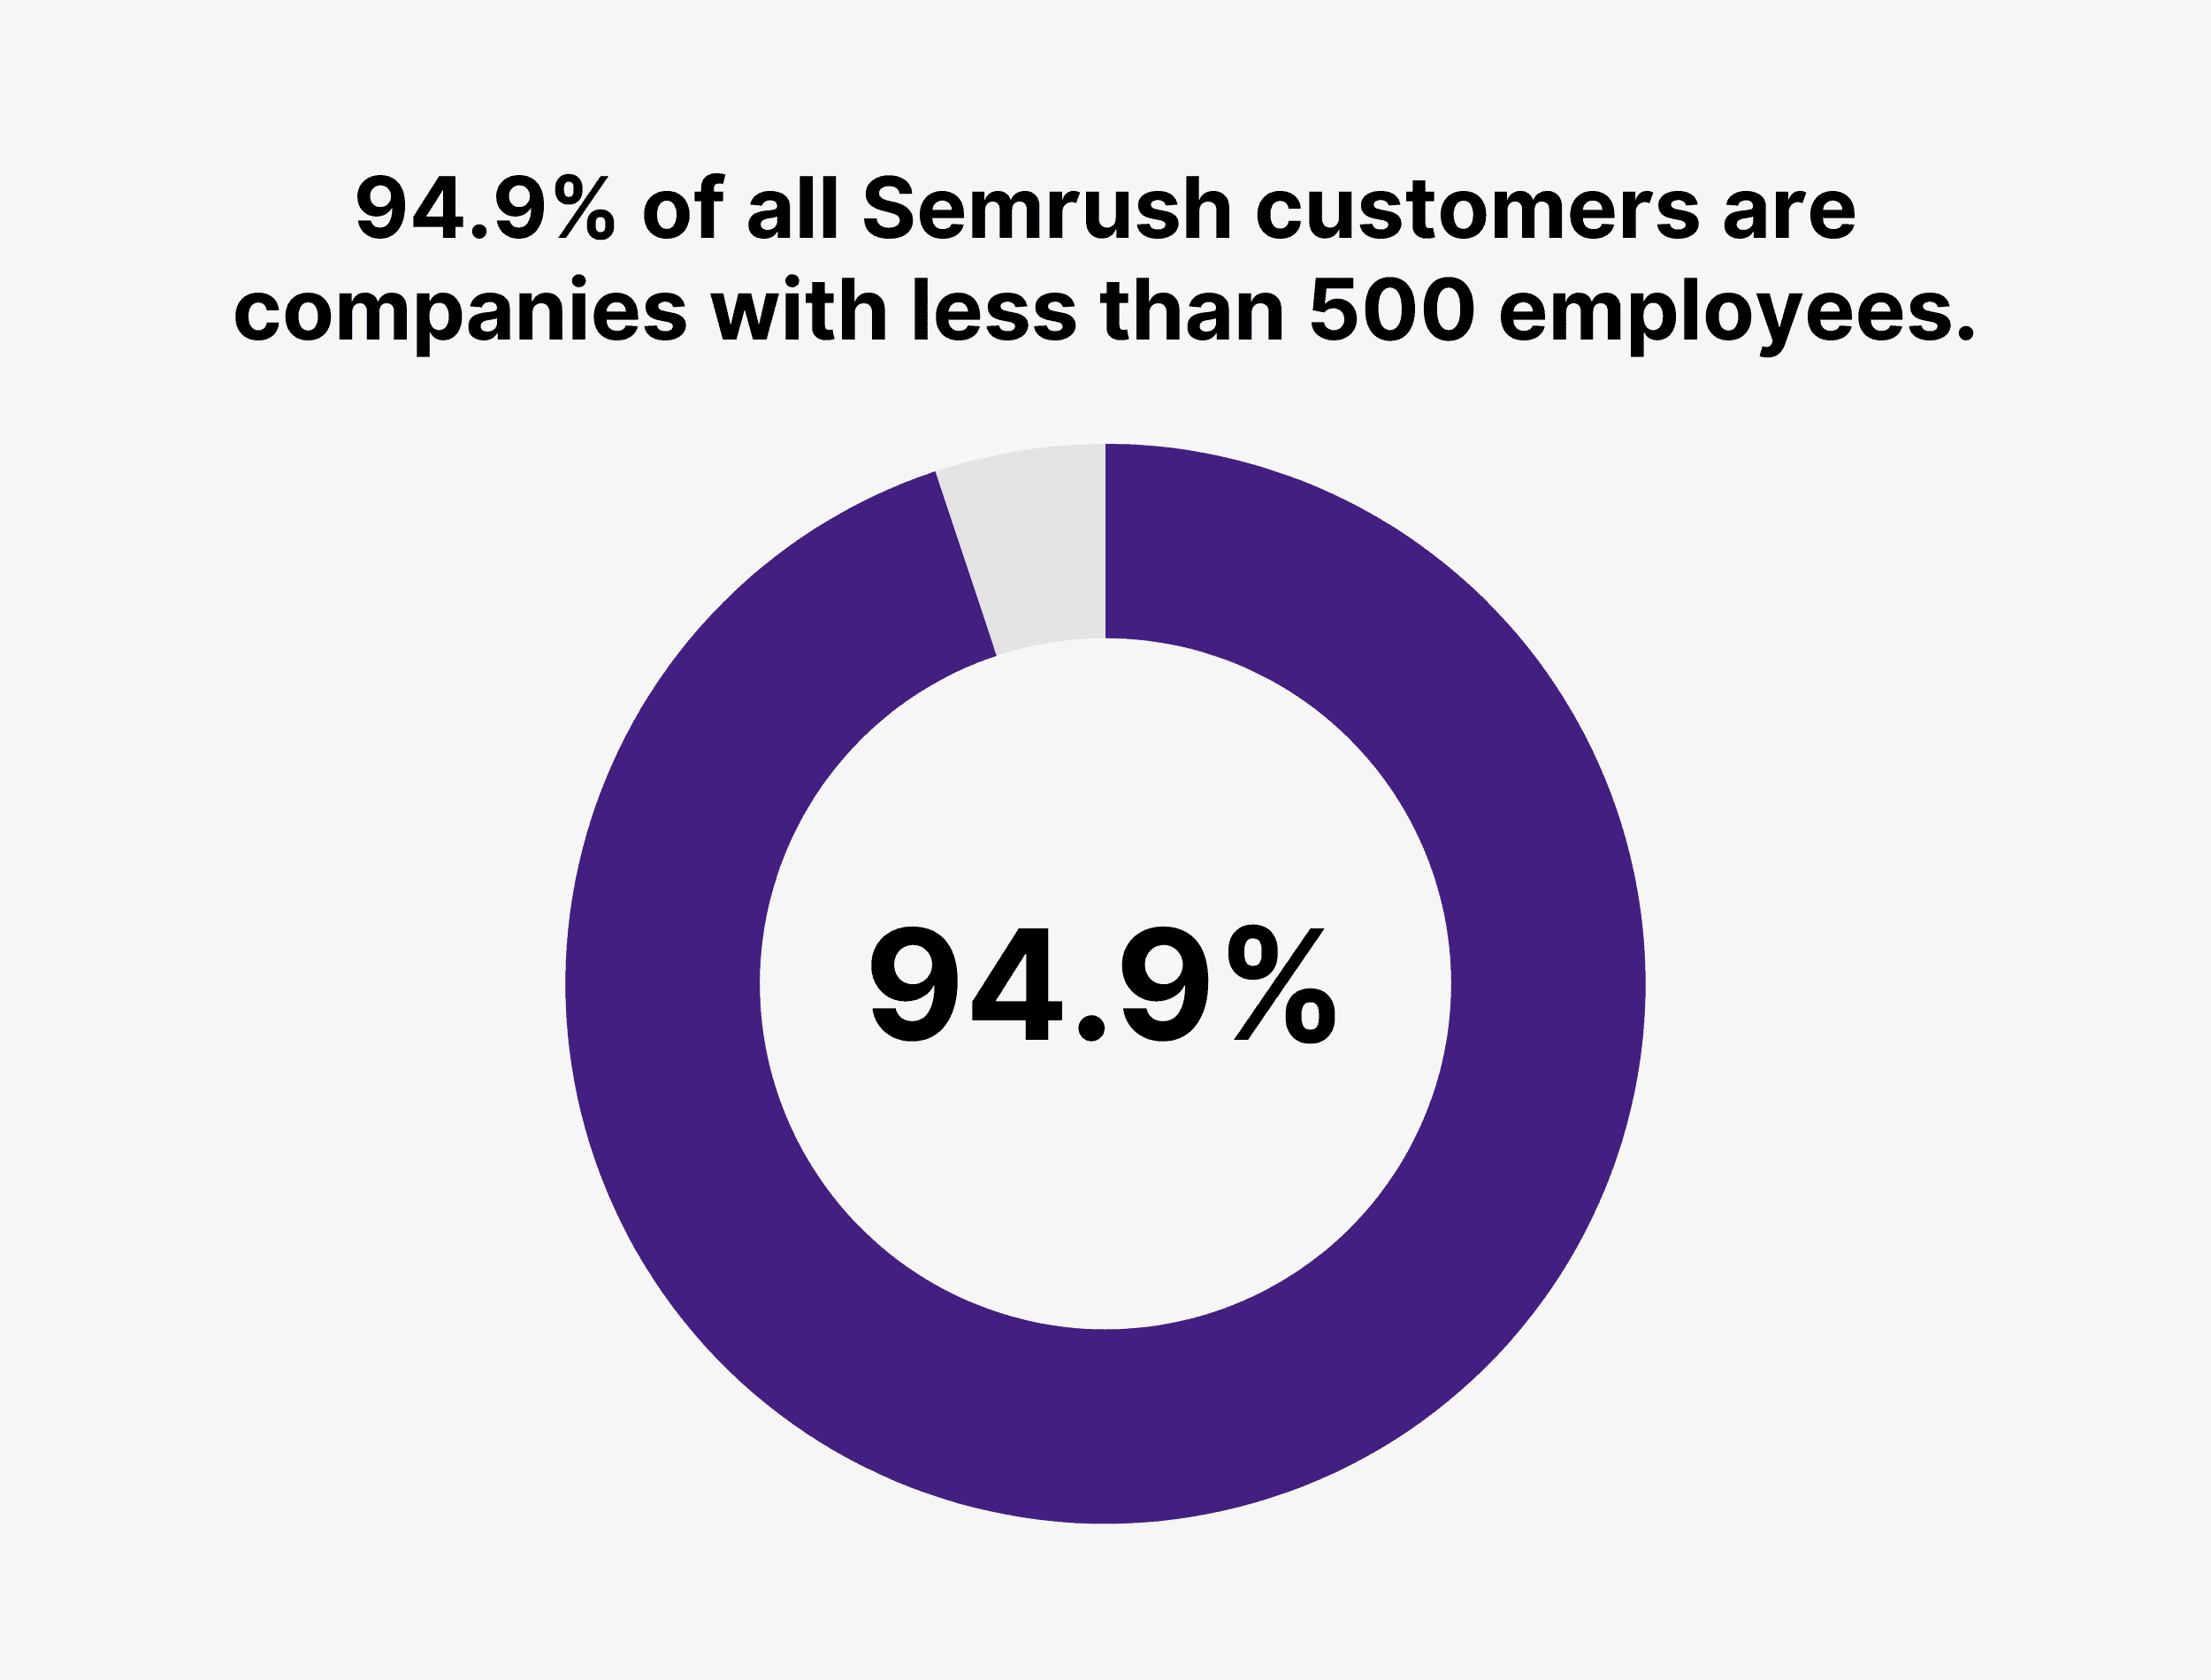 94.9% of all Semrush customers are companies with less than 500 employees.